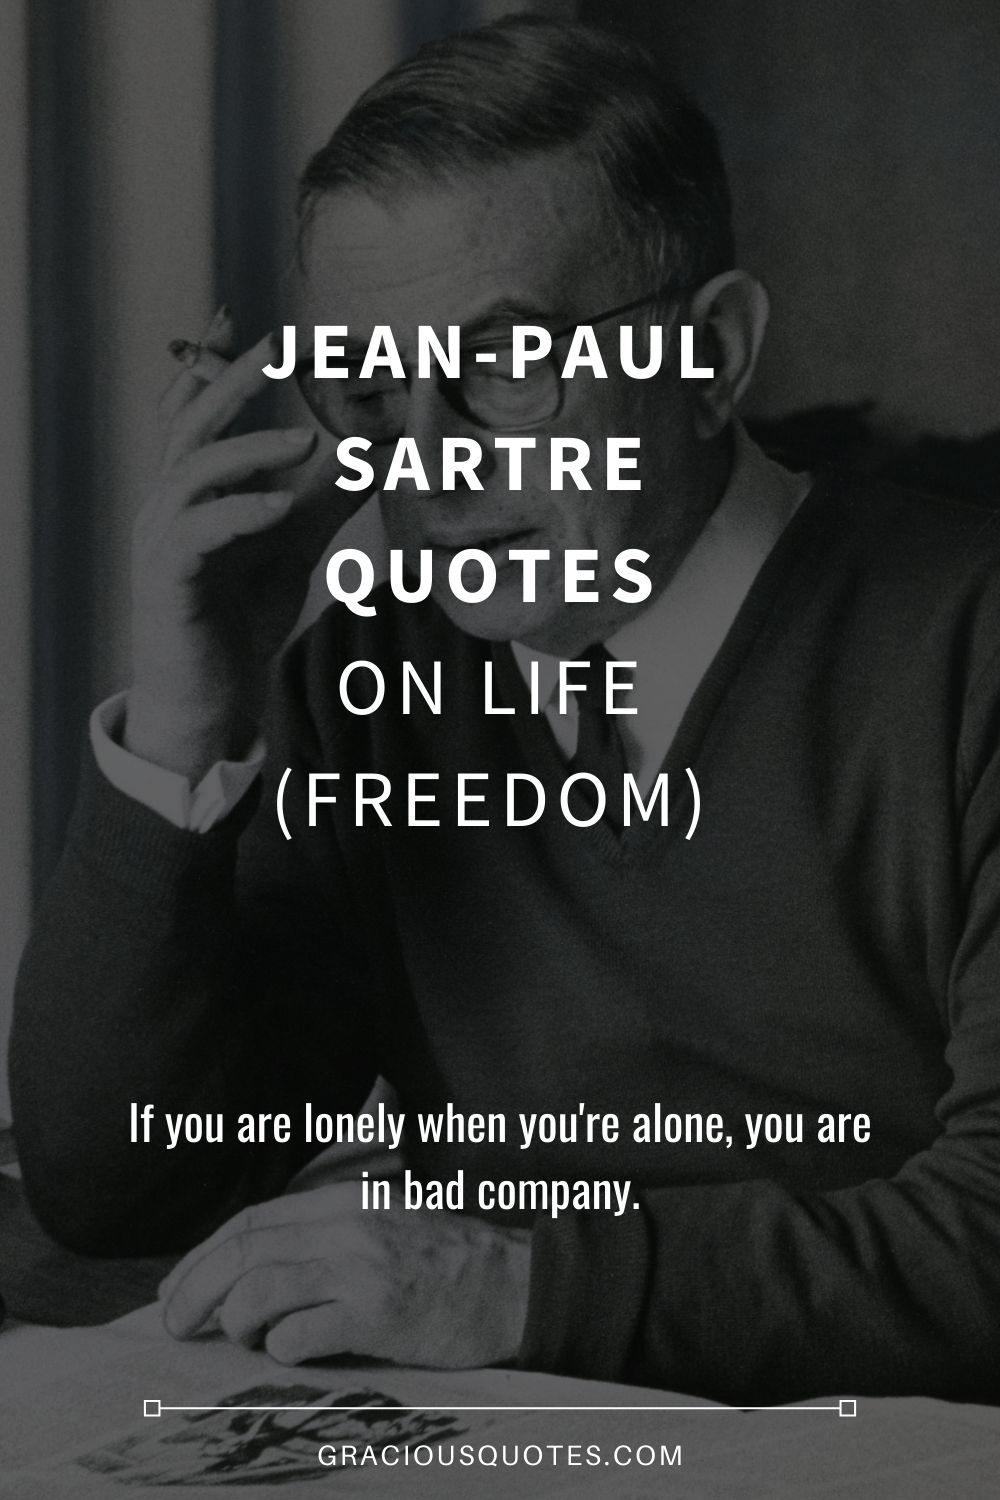 Jean-Paul Sartre Quotes on Life (FREEDOM) - Gracious Quotes